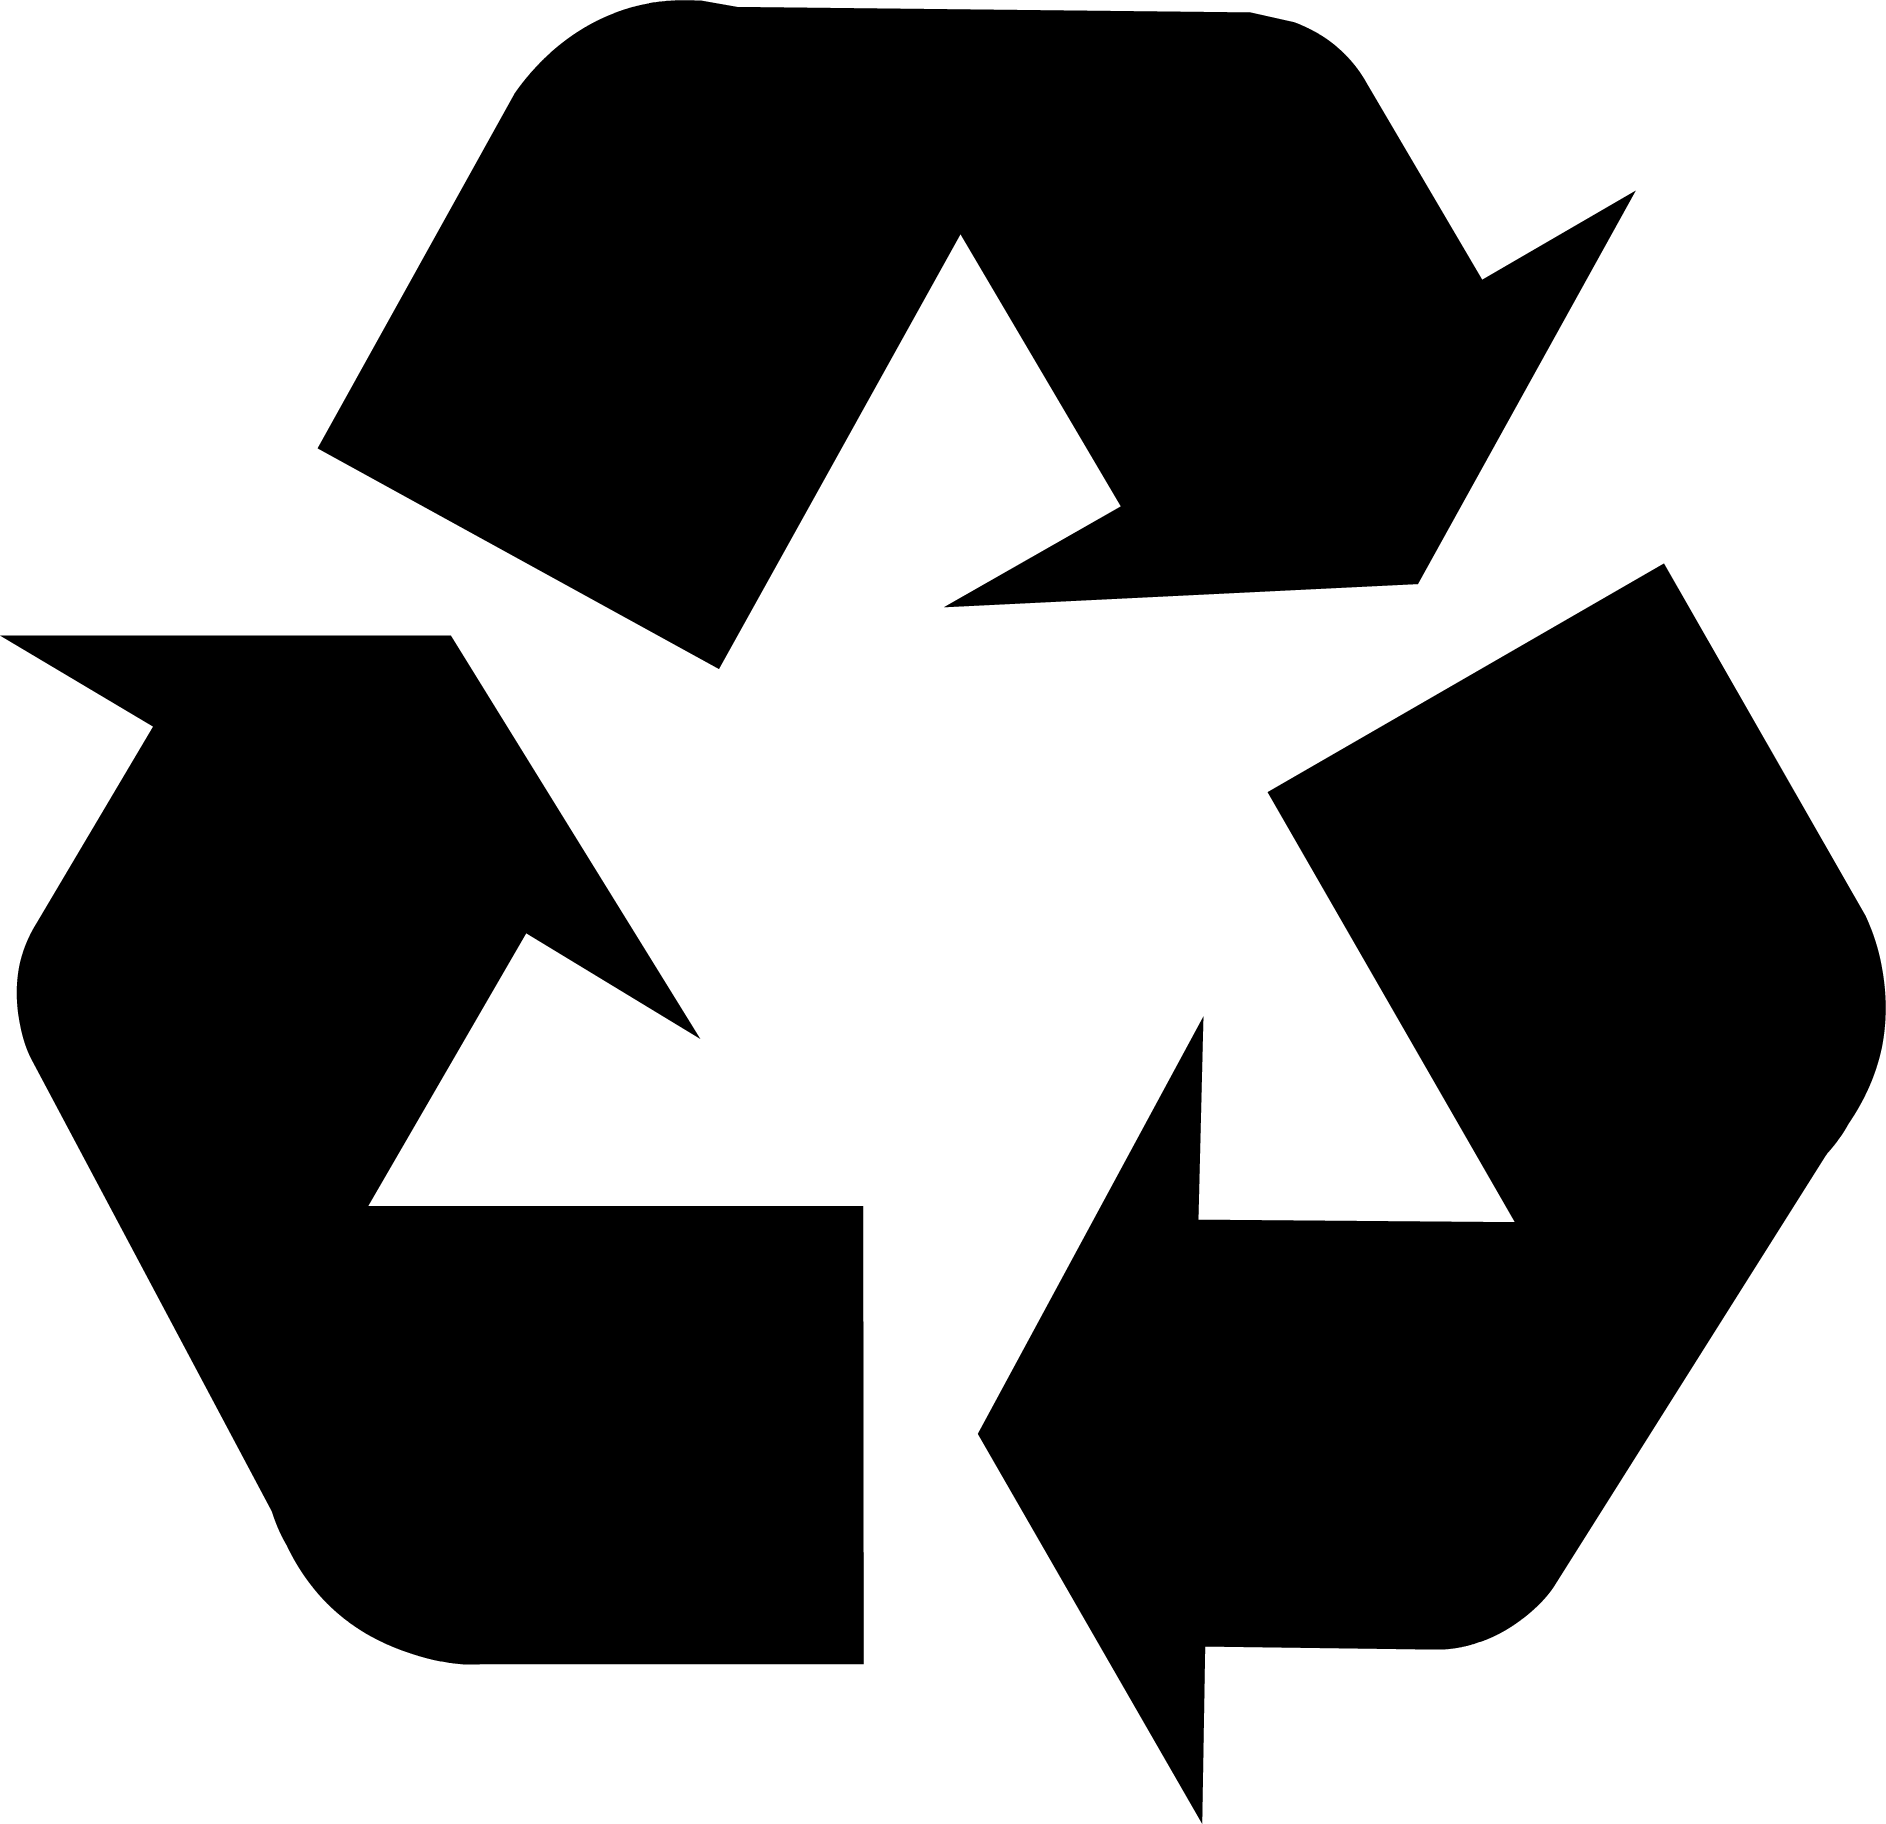 Black and White Recycle Logo - Recycling Symbol the Original Recycle Logo